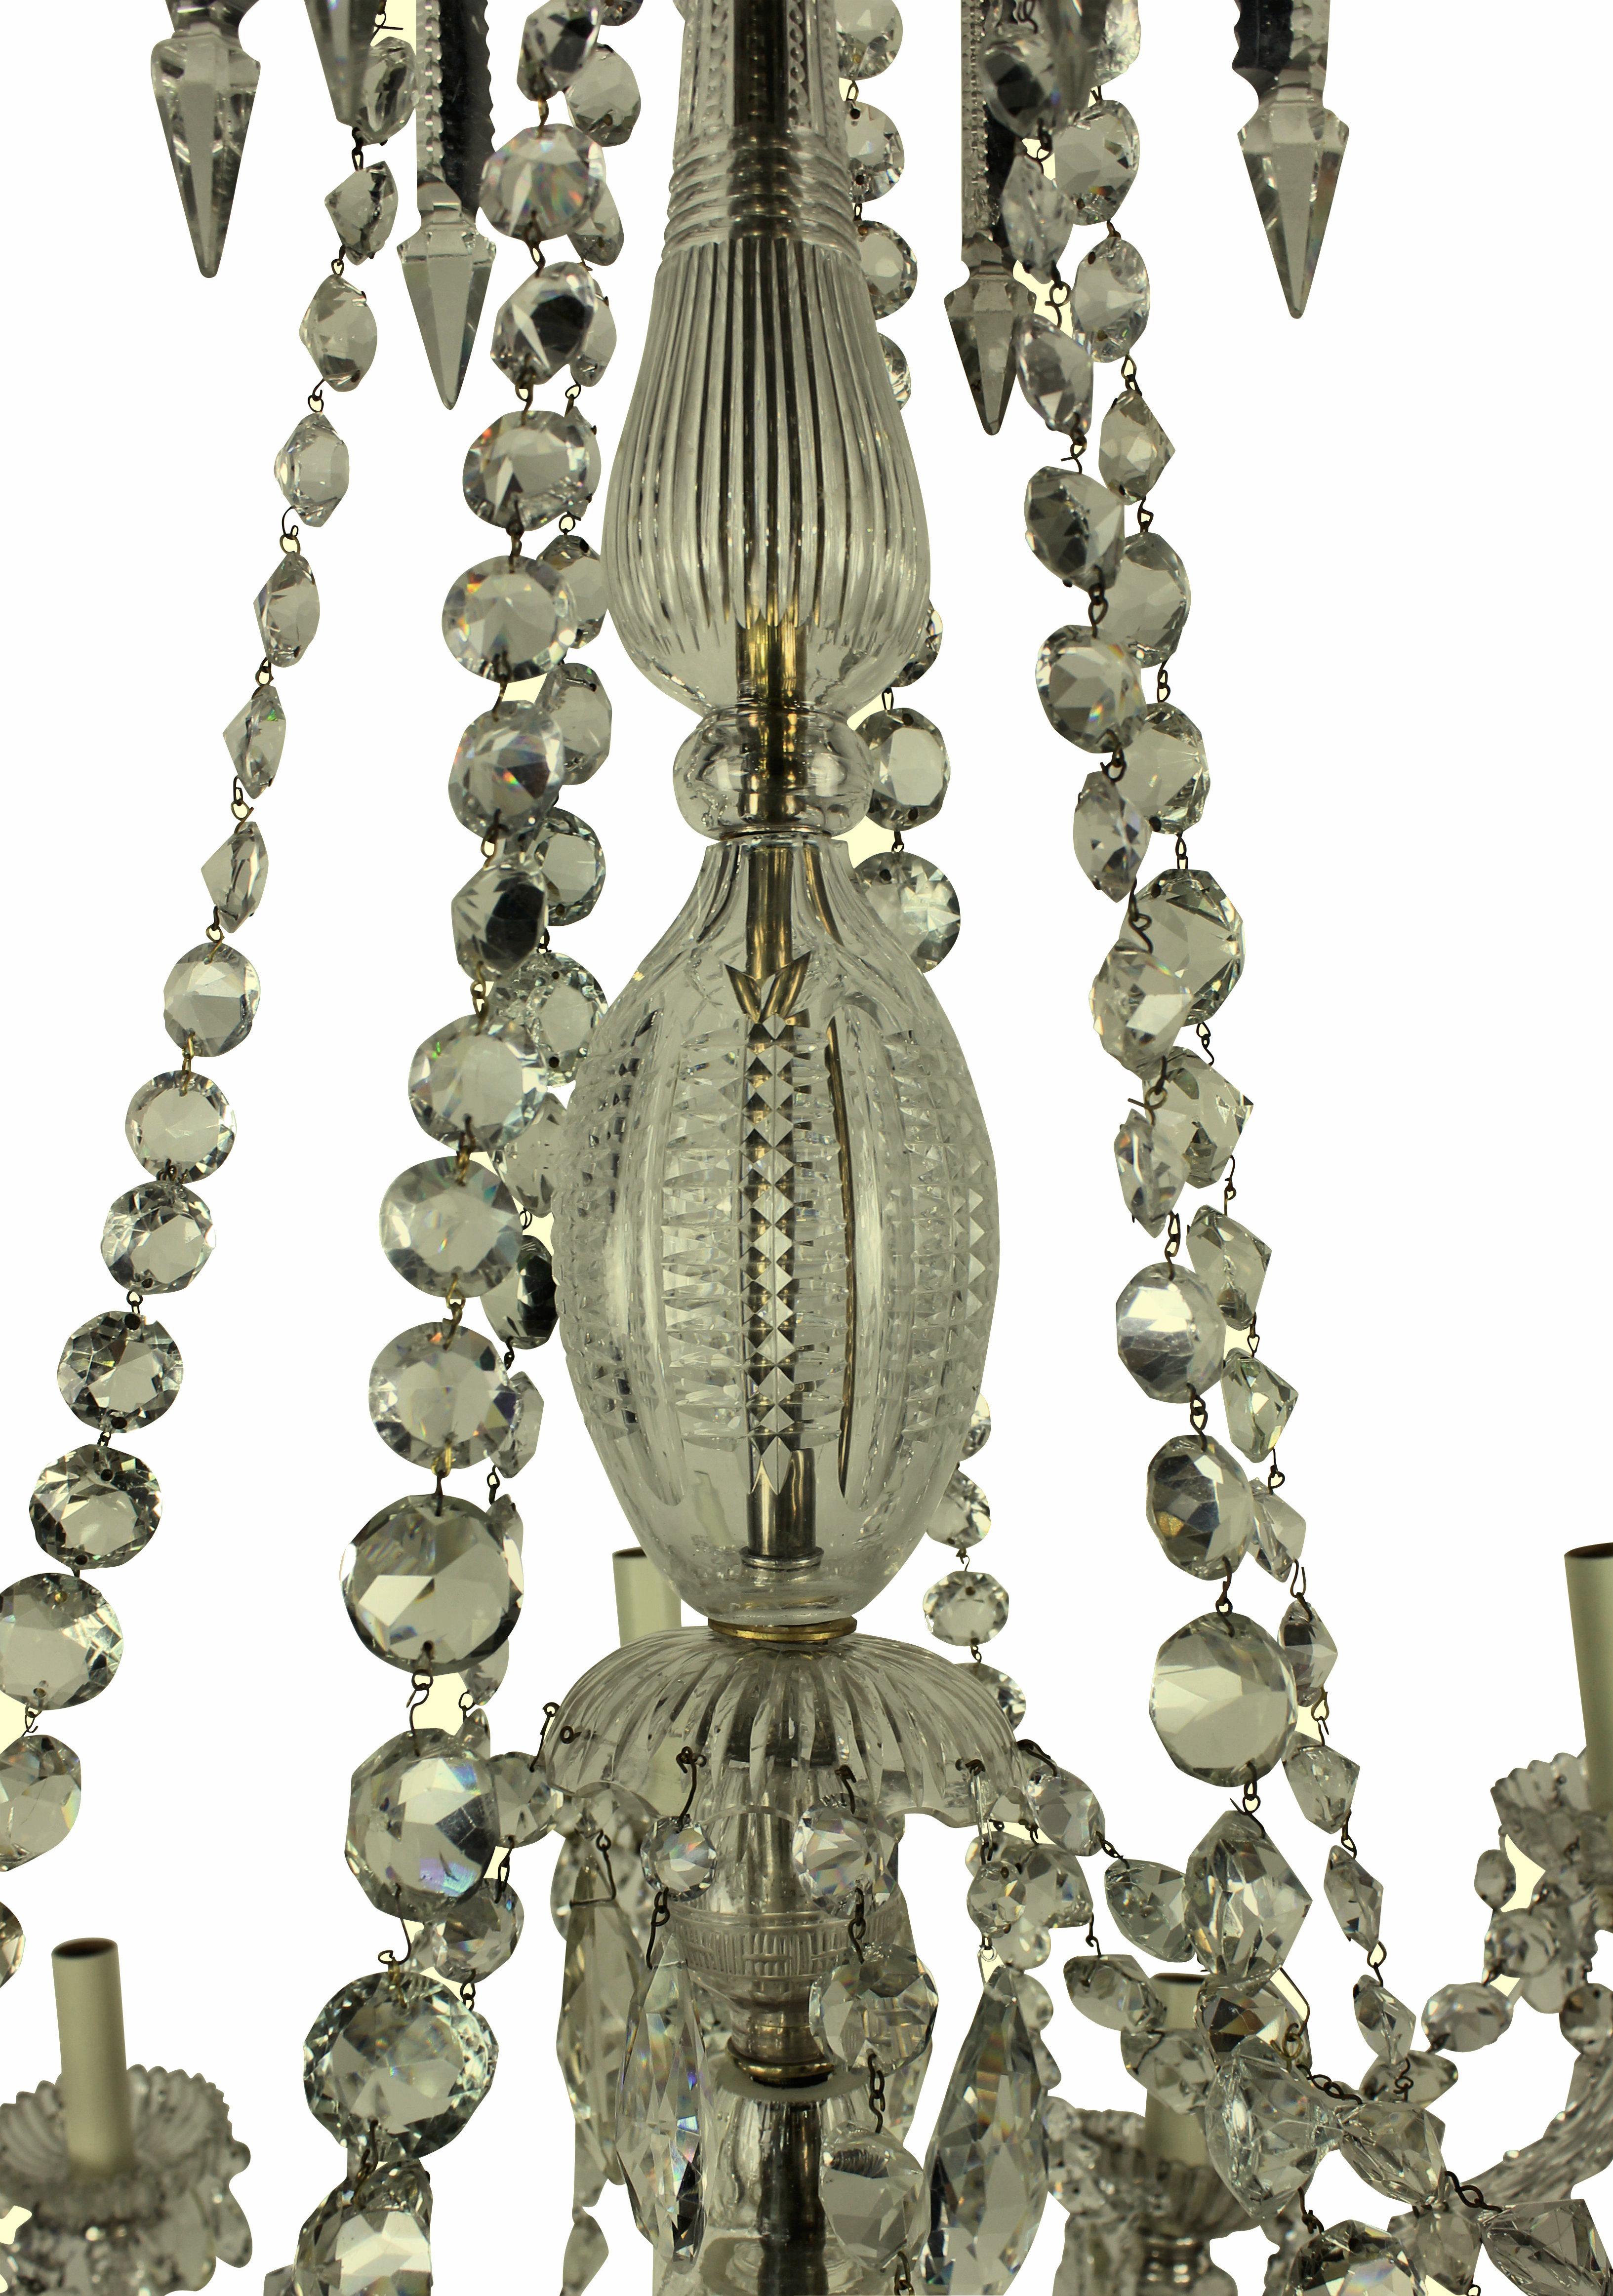 A fine English cut-glass chandelier of very fine quality by Perry & Co. of New Bond Street. Tiered with twelve faceted scrolled branches issuing stellar cut pans and nozzles from lobed wells and baluster vase shaped column, hung with faceted